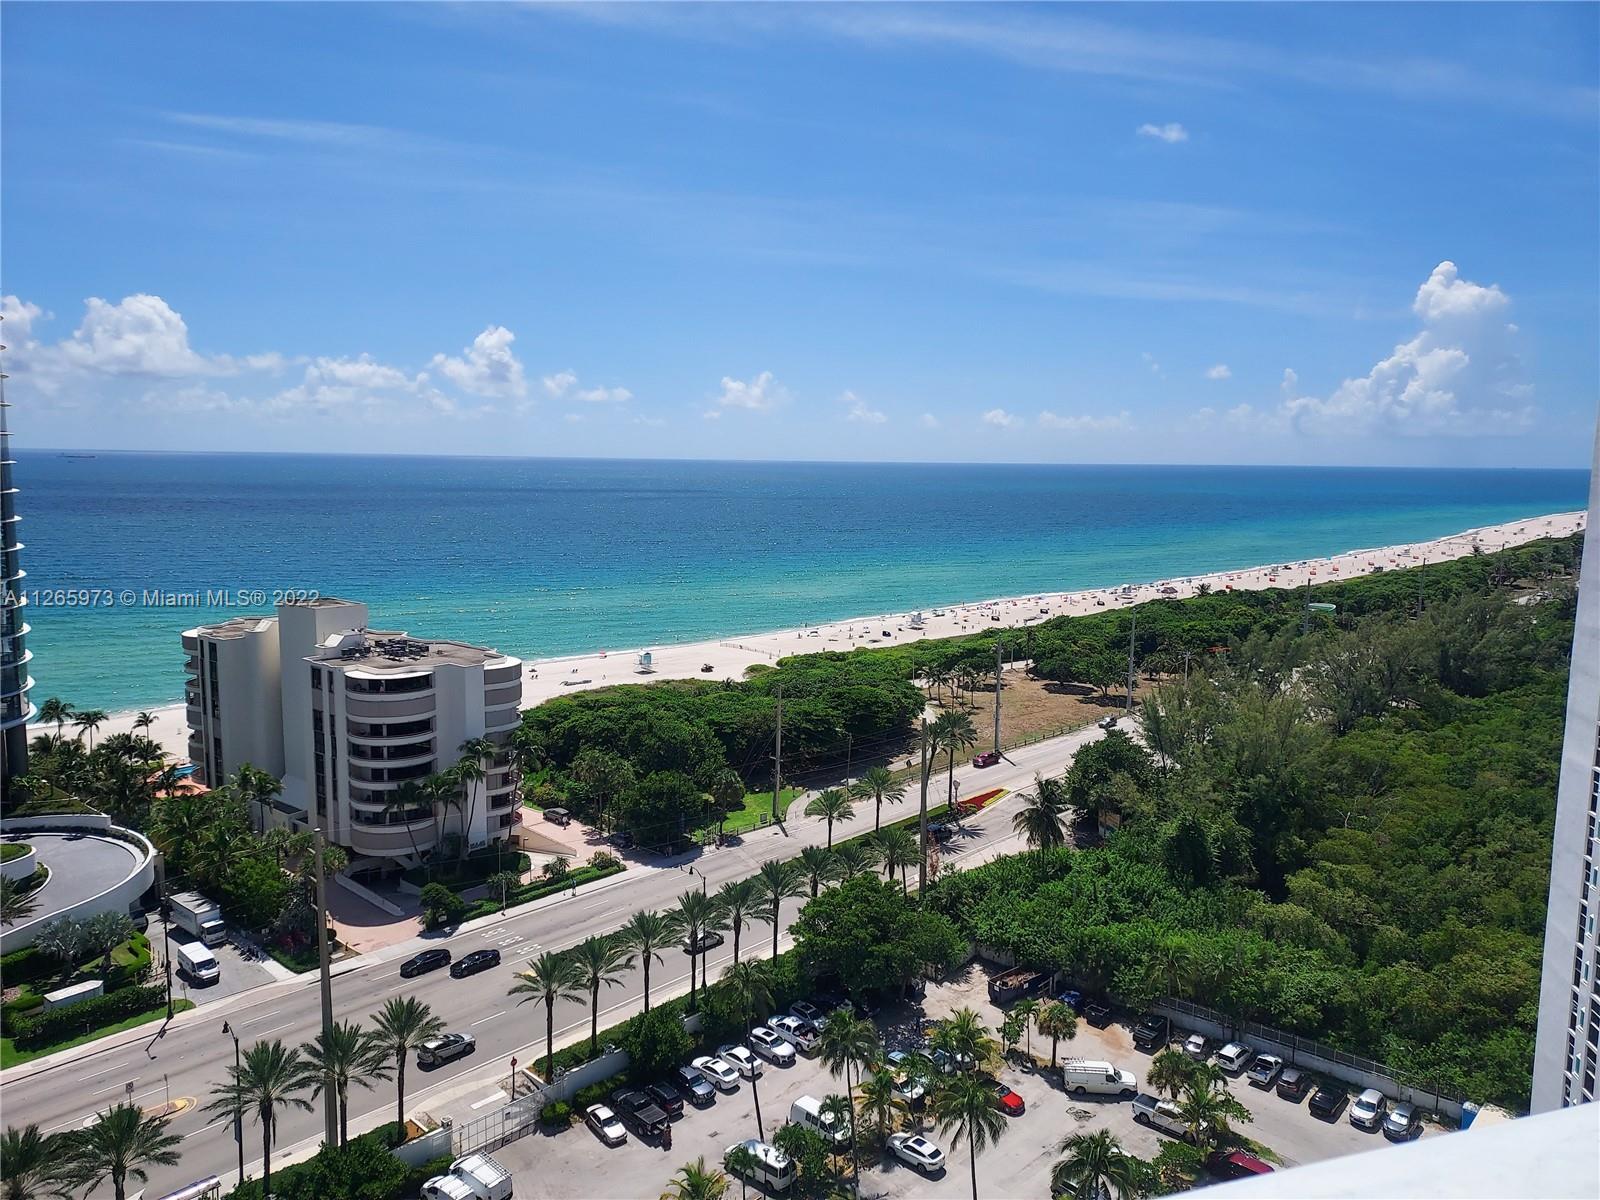 Location & Ocean Views from every room. Unobstructed ocean views facing over the haulover beach park